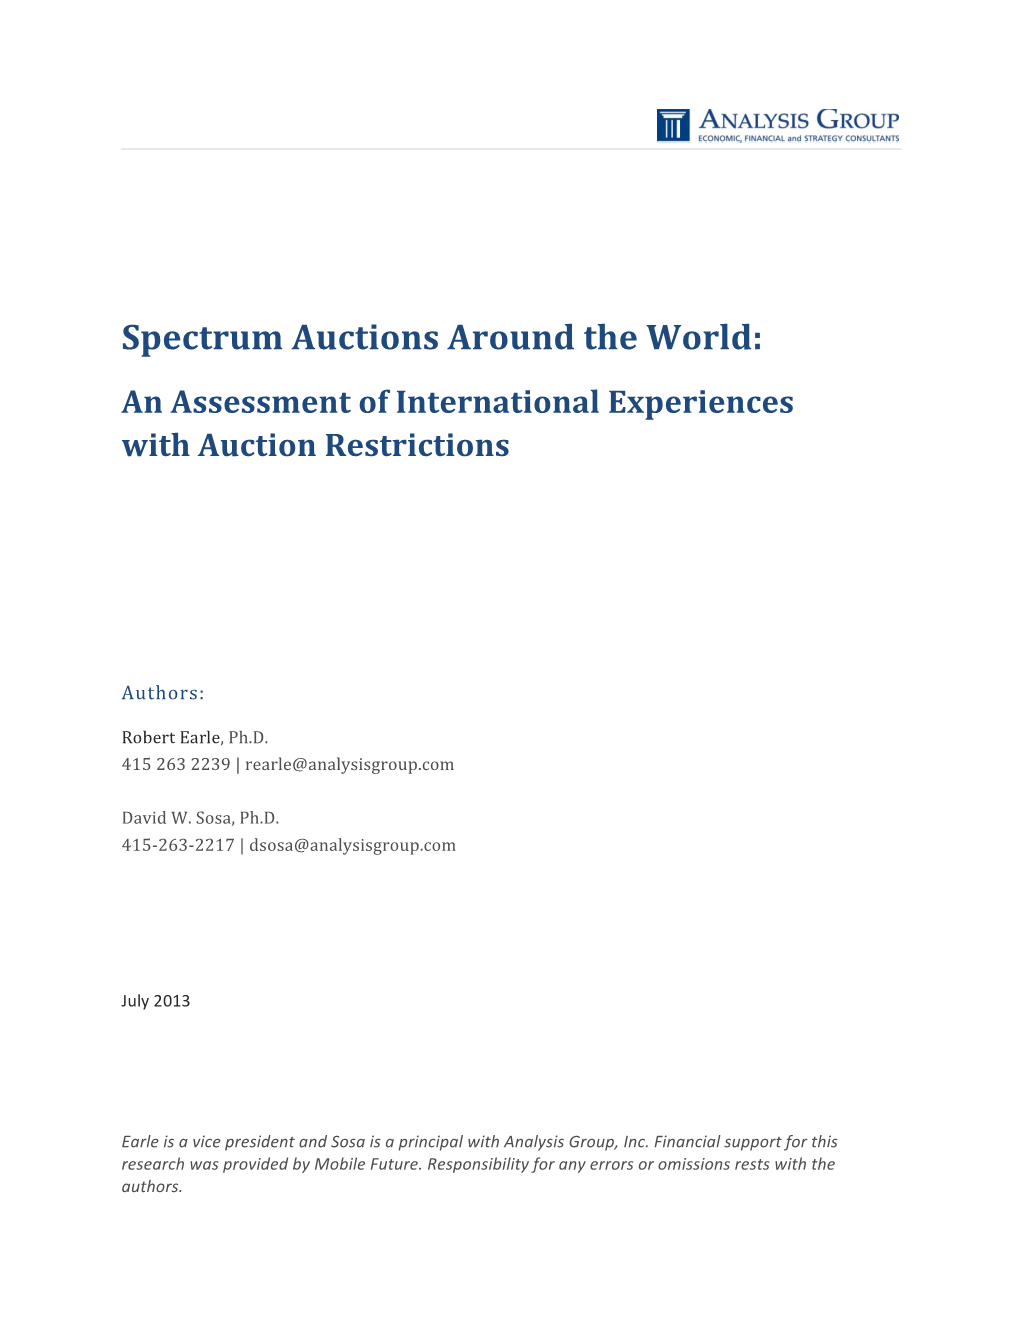 Spectrum Auctions Around the World: an Assessment of International Experiences with Auction Restrictions